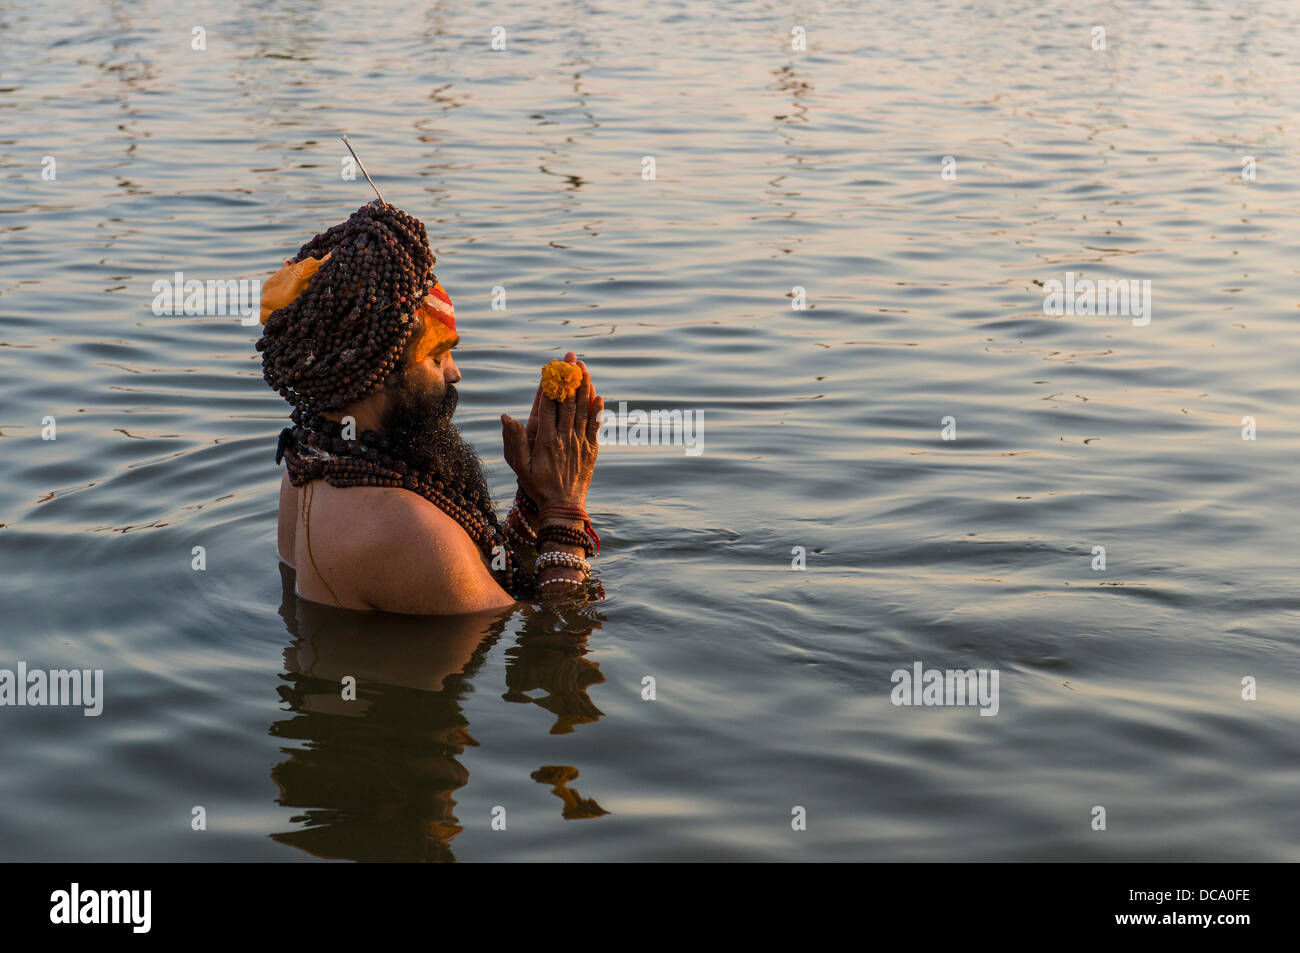 Sadhu, holy man, taking a bath and praying in the Sangam, the confluence of the rivers Ganges, Yamuna and Saraswati, just before Stock Photo